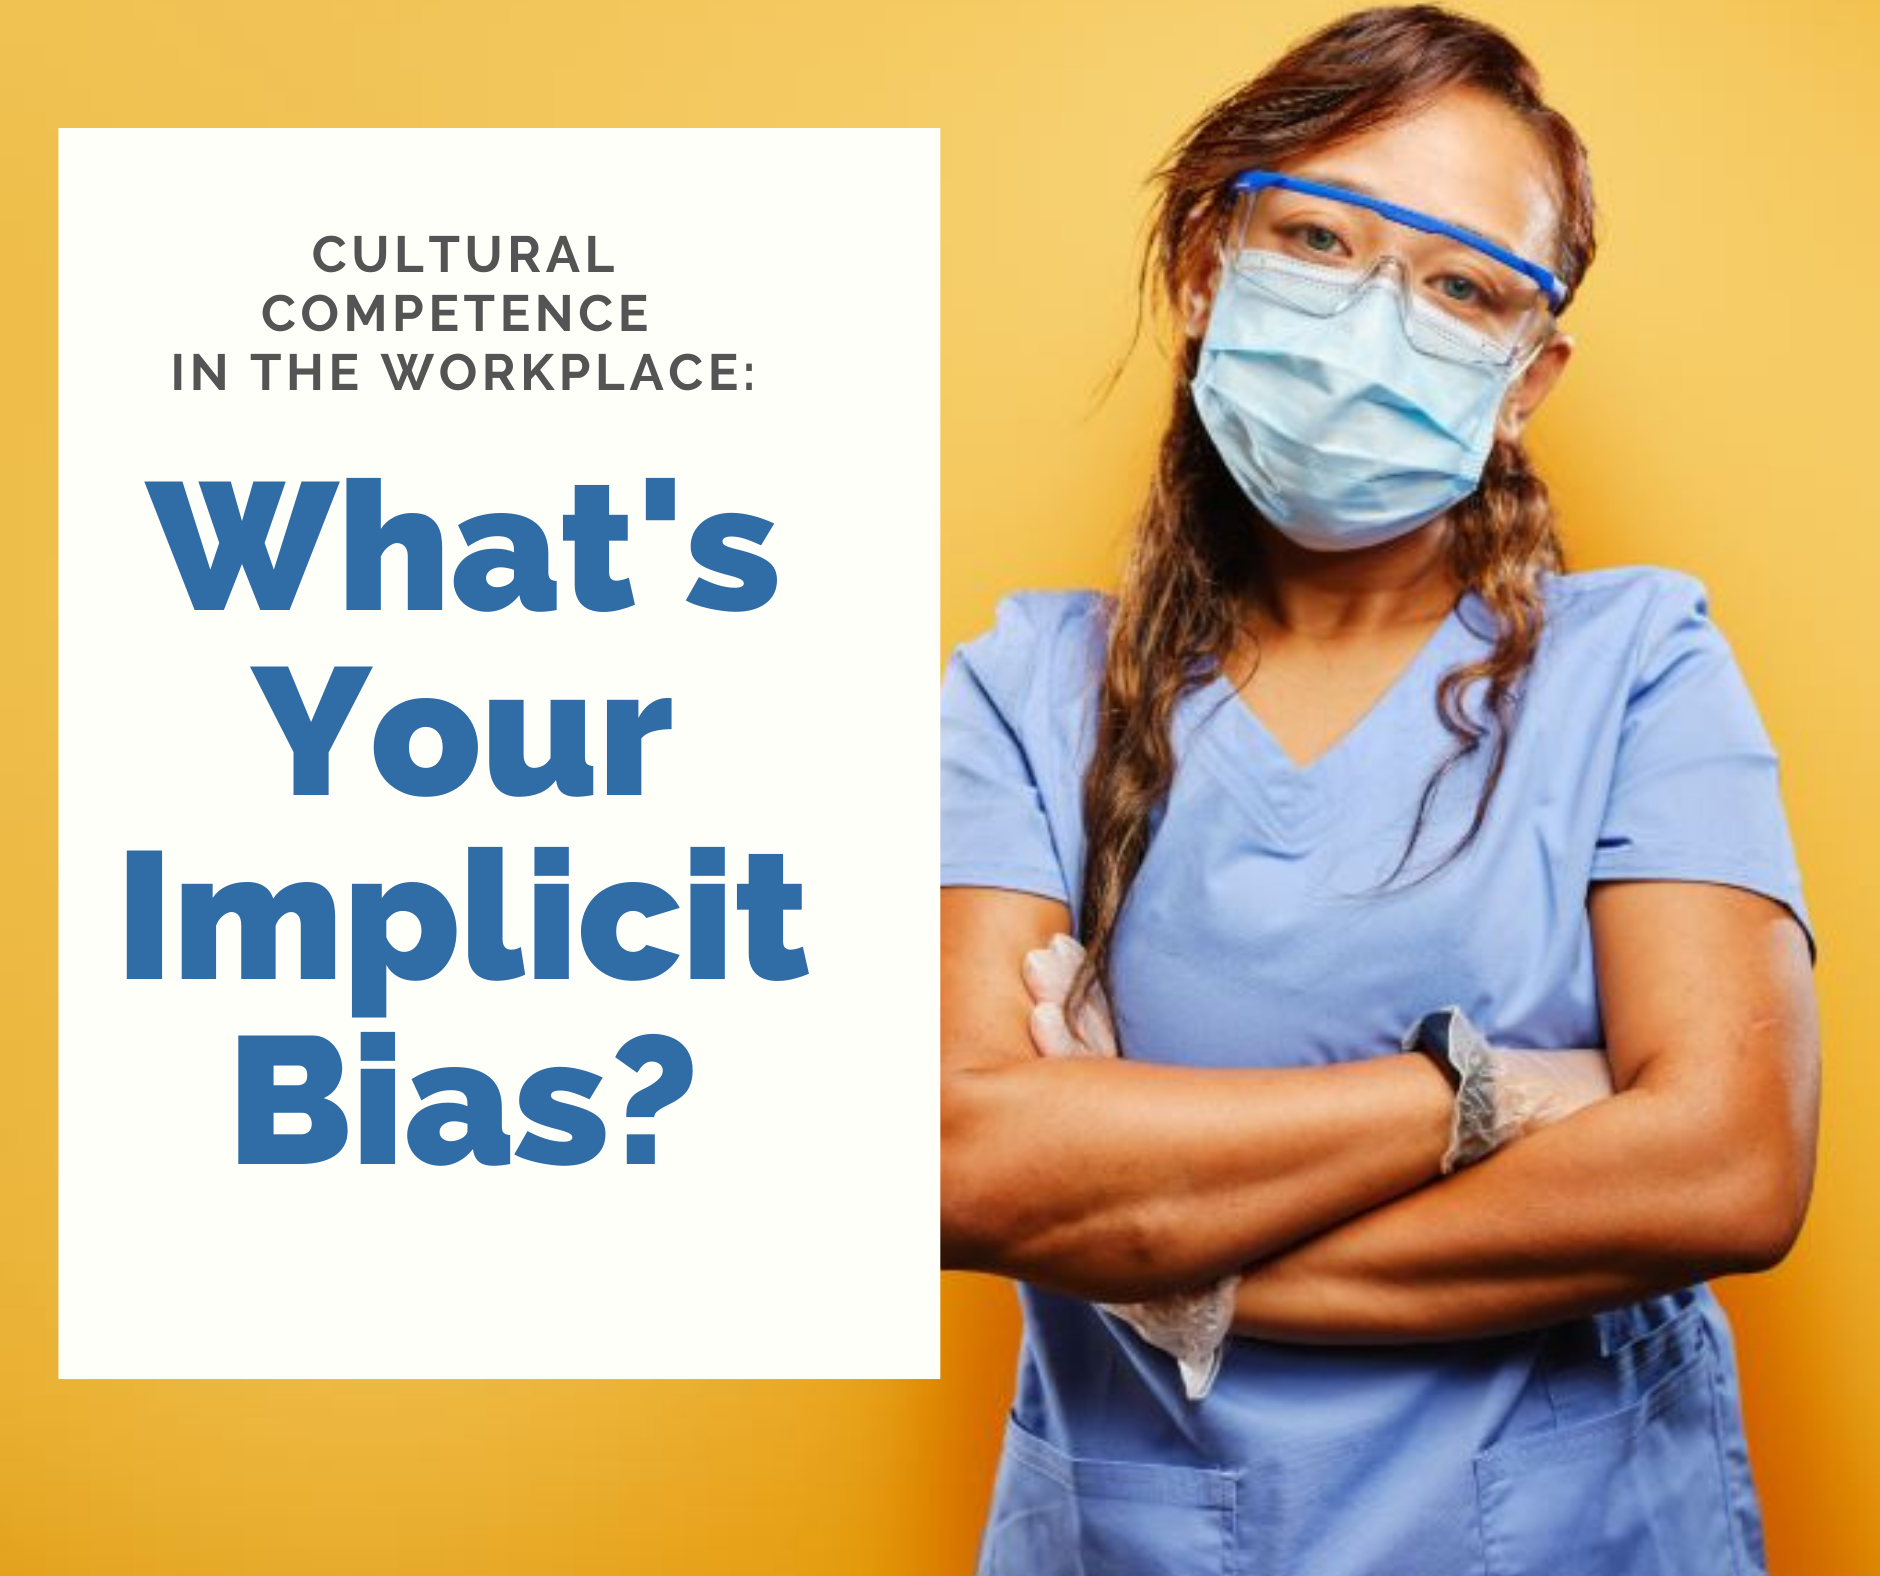 What is your implicit bias as a nurse